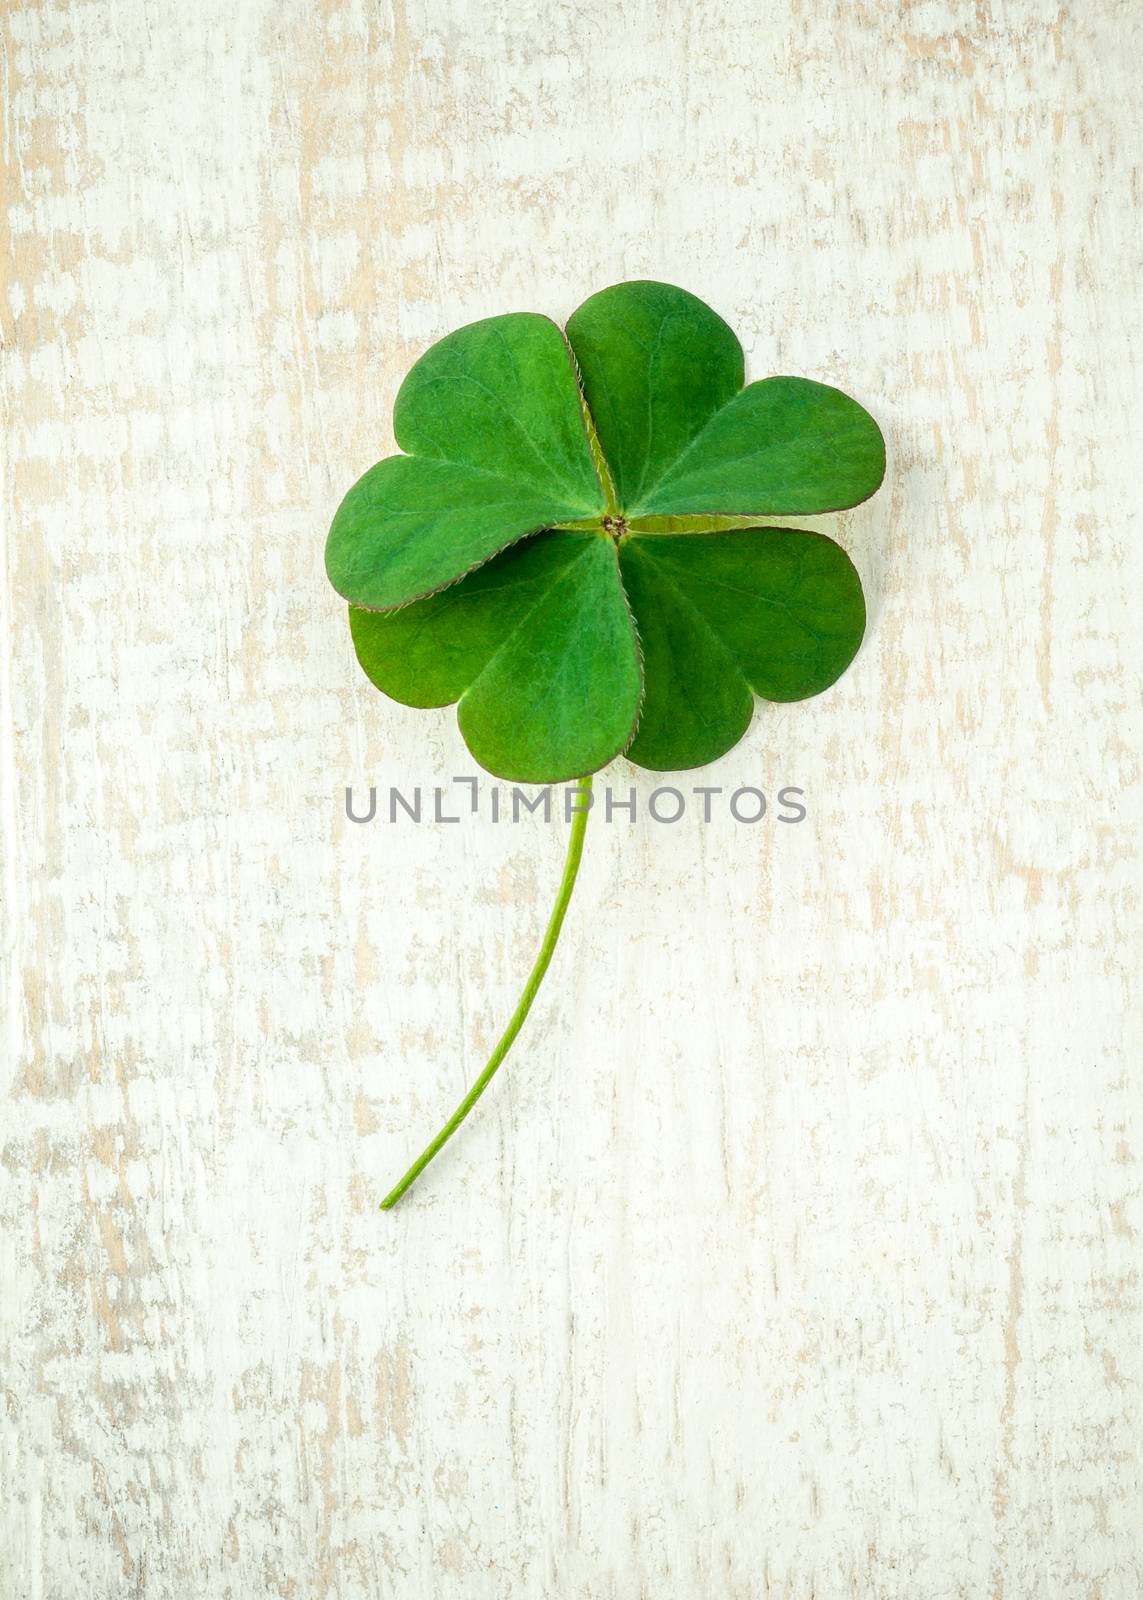 Clover leaves on shabby wooden background. The symbolic of Four  by kerdkanno